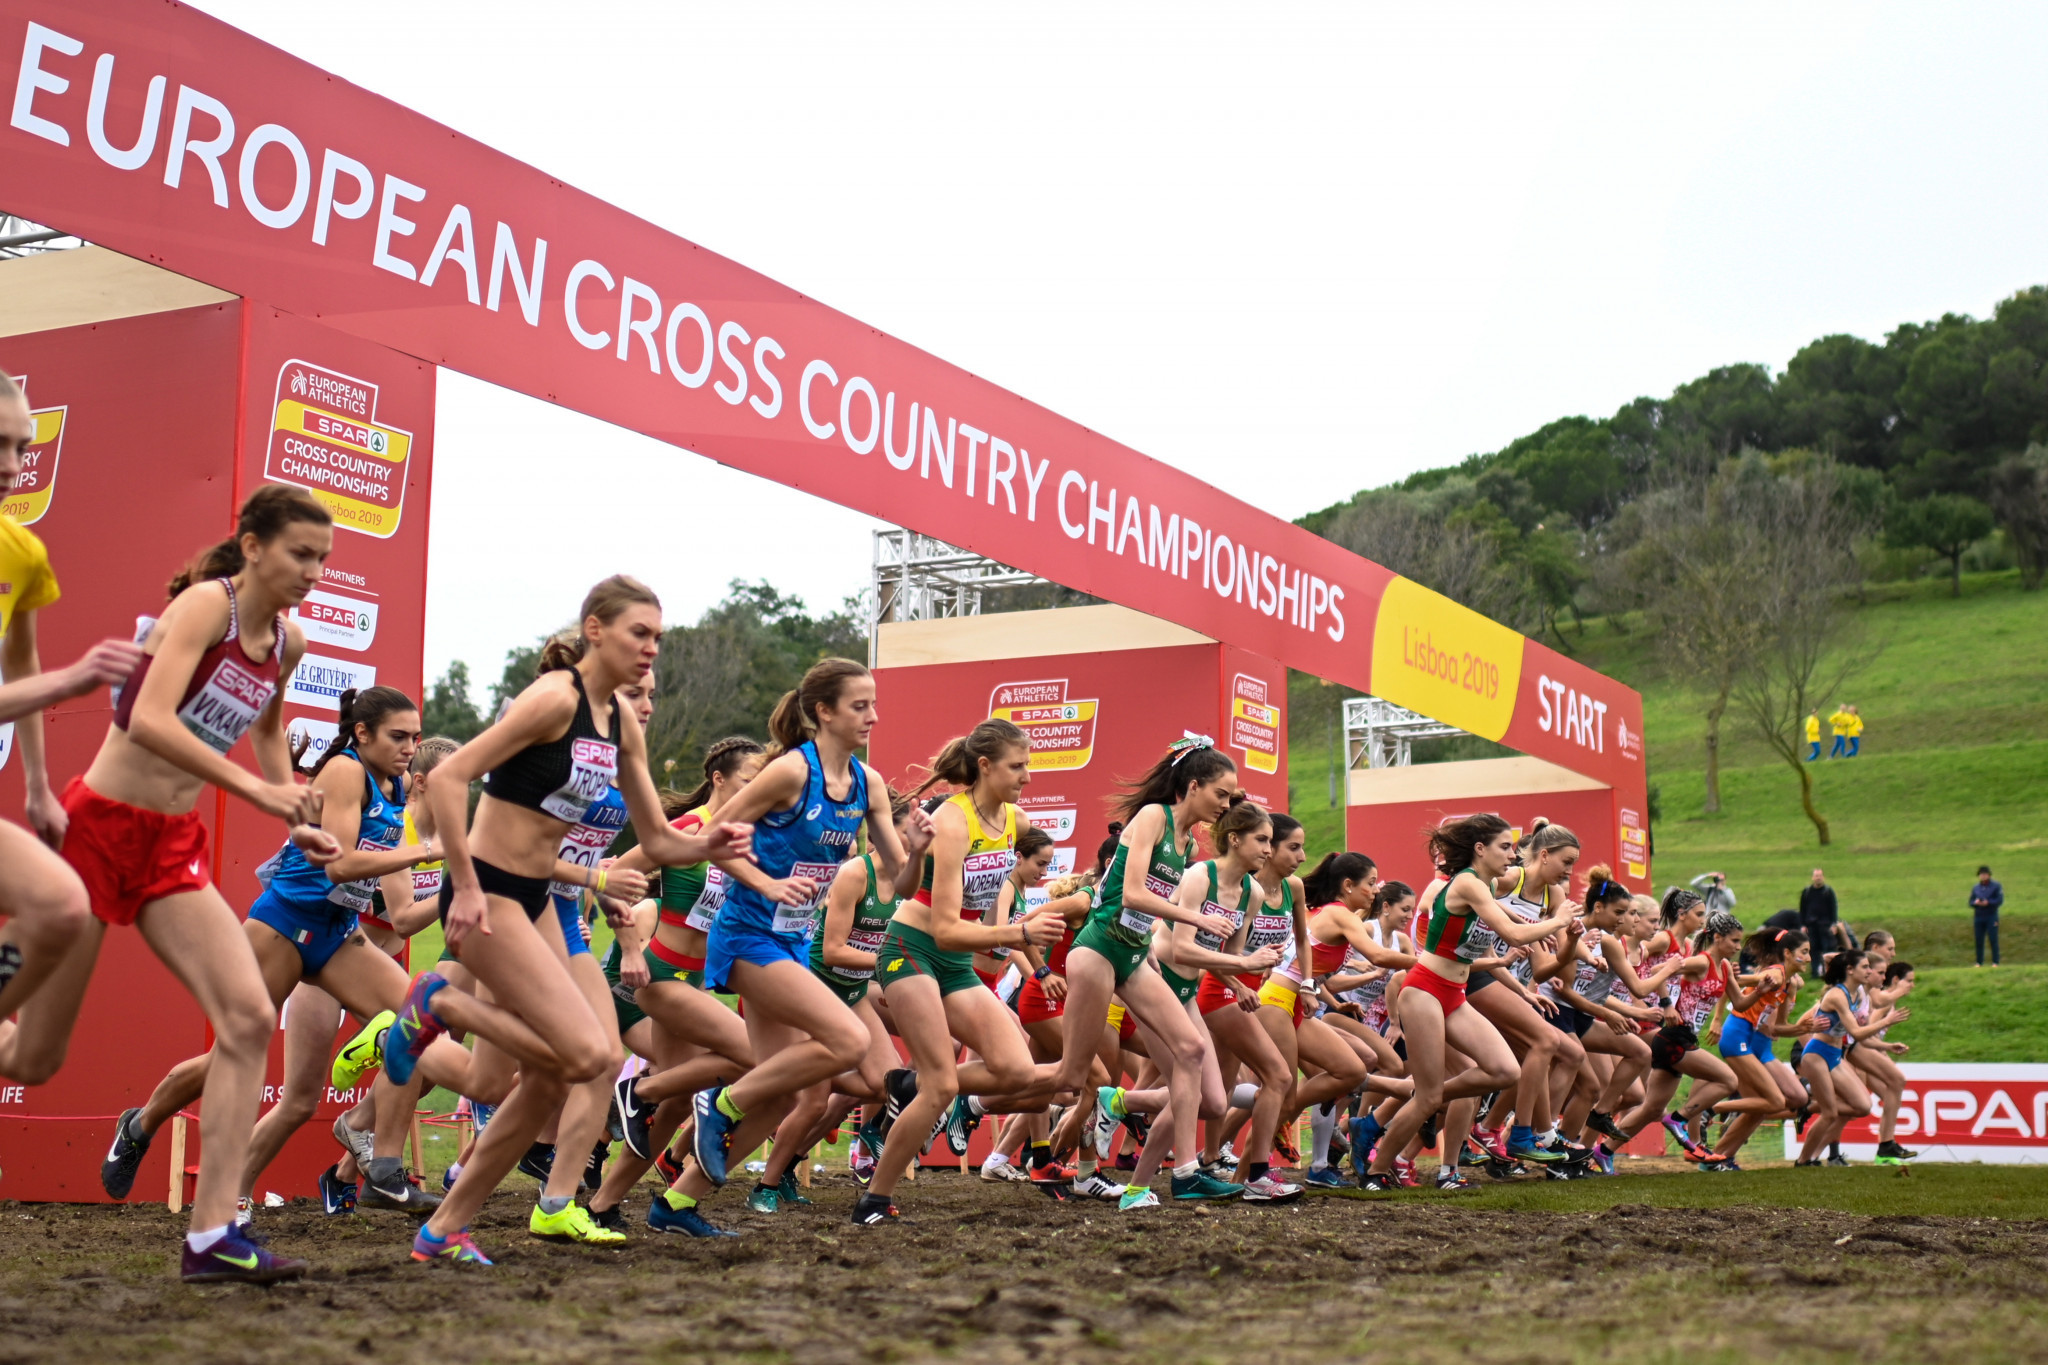 European Cross Country Championships in Dublin cancelled due to COVID-19 uncertainties